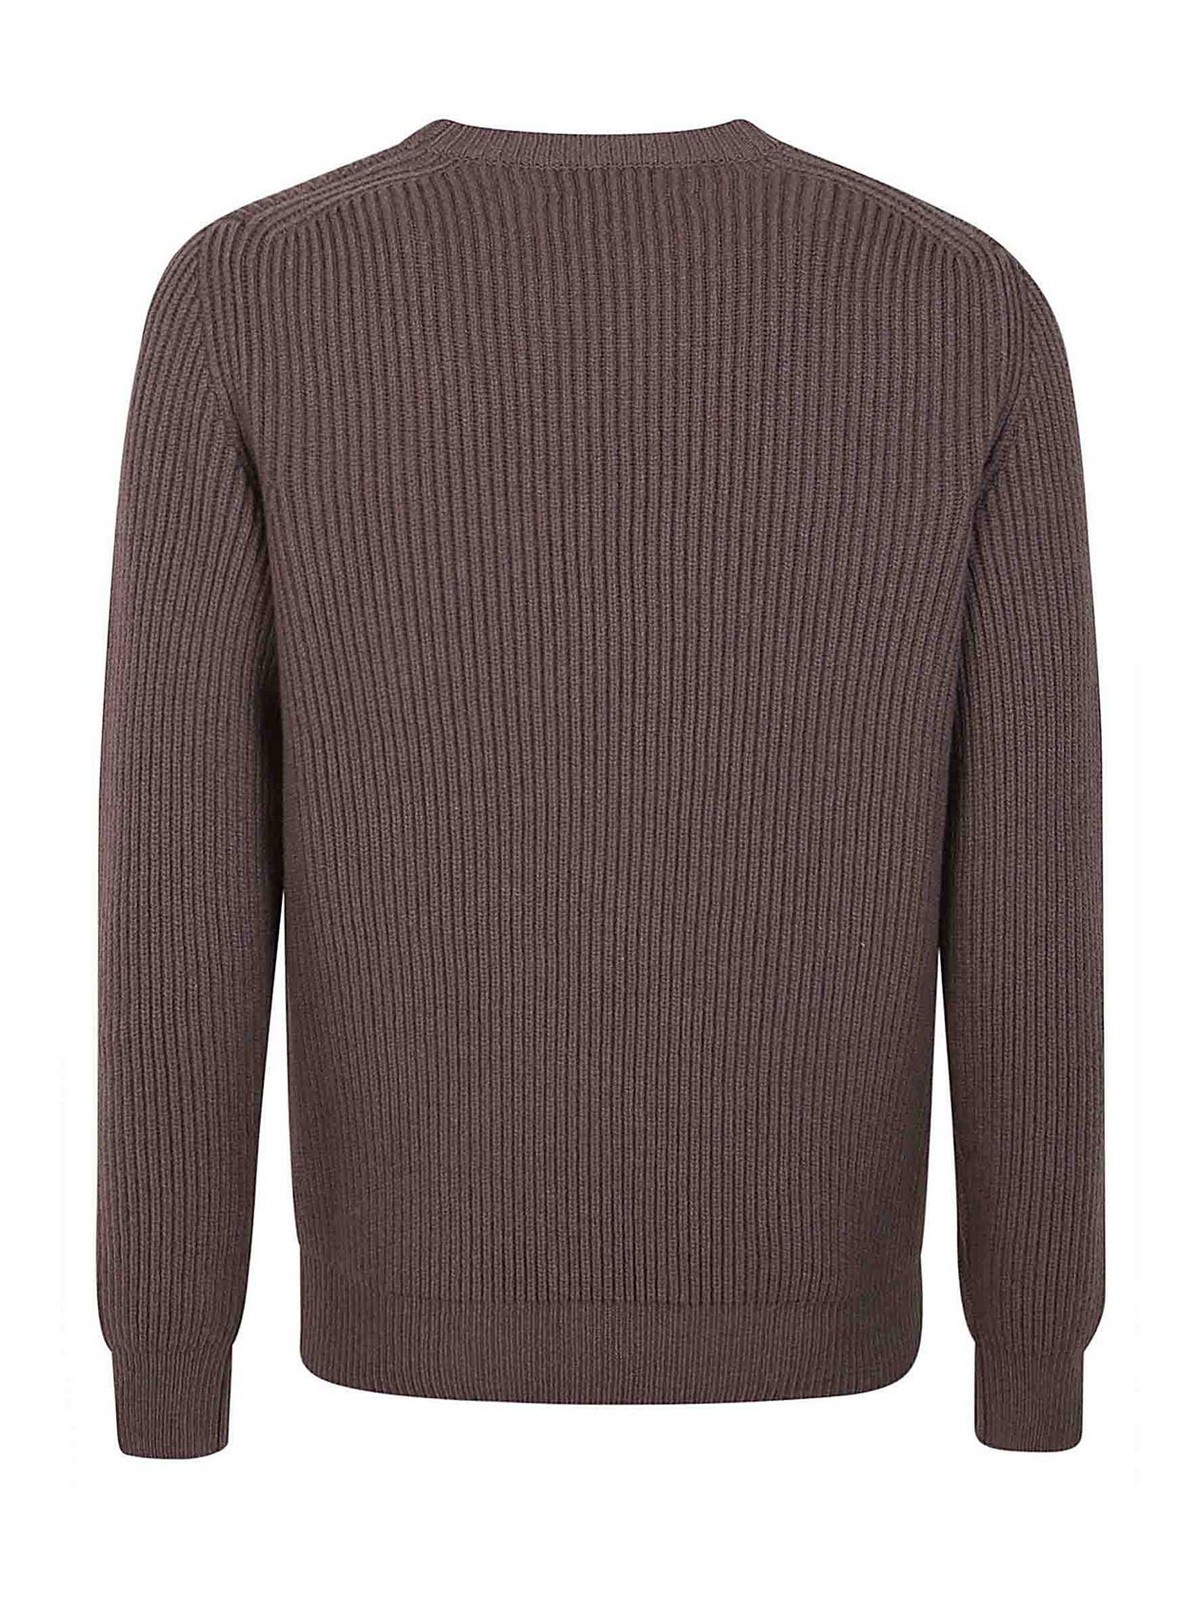 Shop Mcgeorge Of Scotland Crew Neck Sweater In Brown